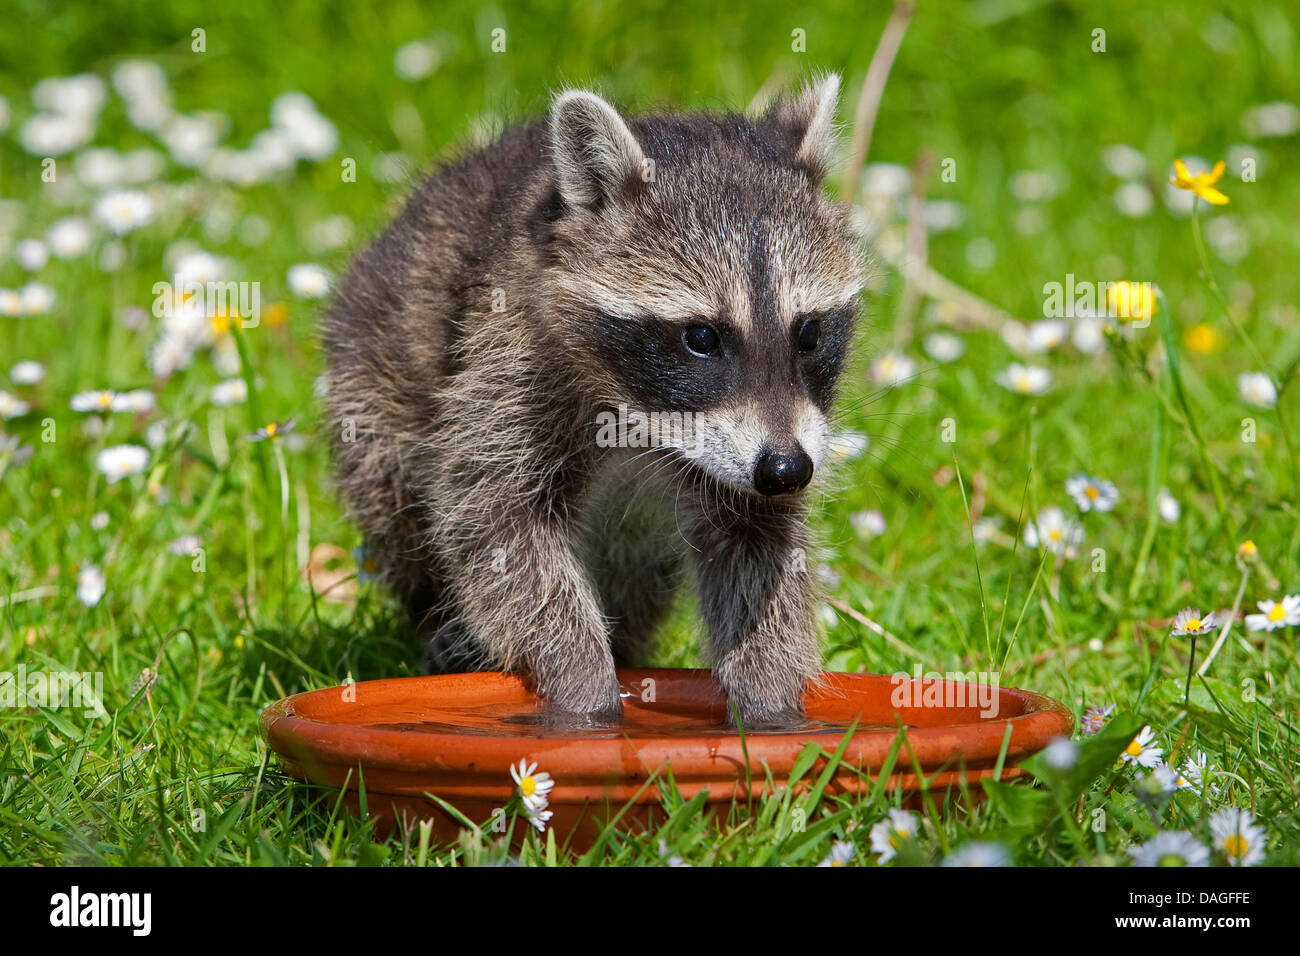 common raccoon (Procyon lotor), in a meadow, splashing with water in a dish, Germany Stock Photo